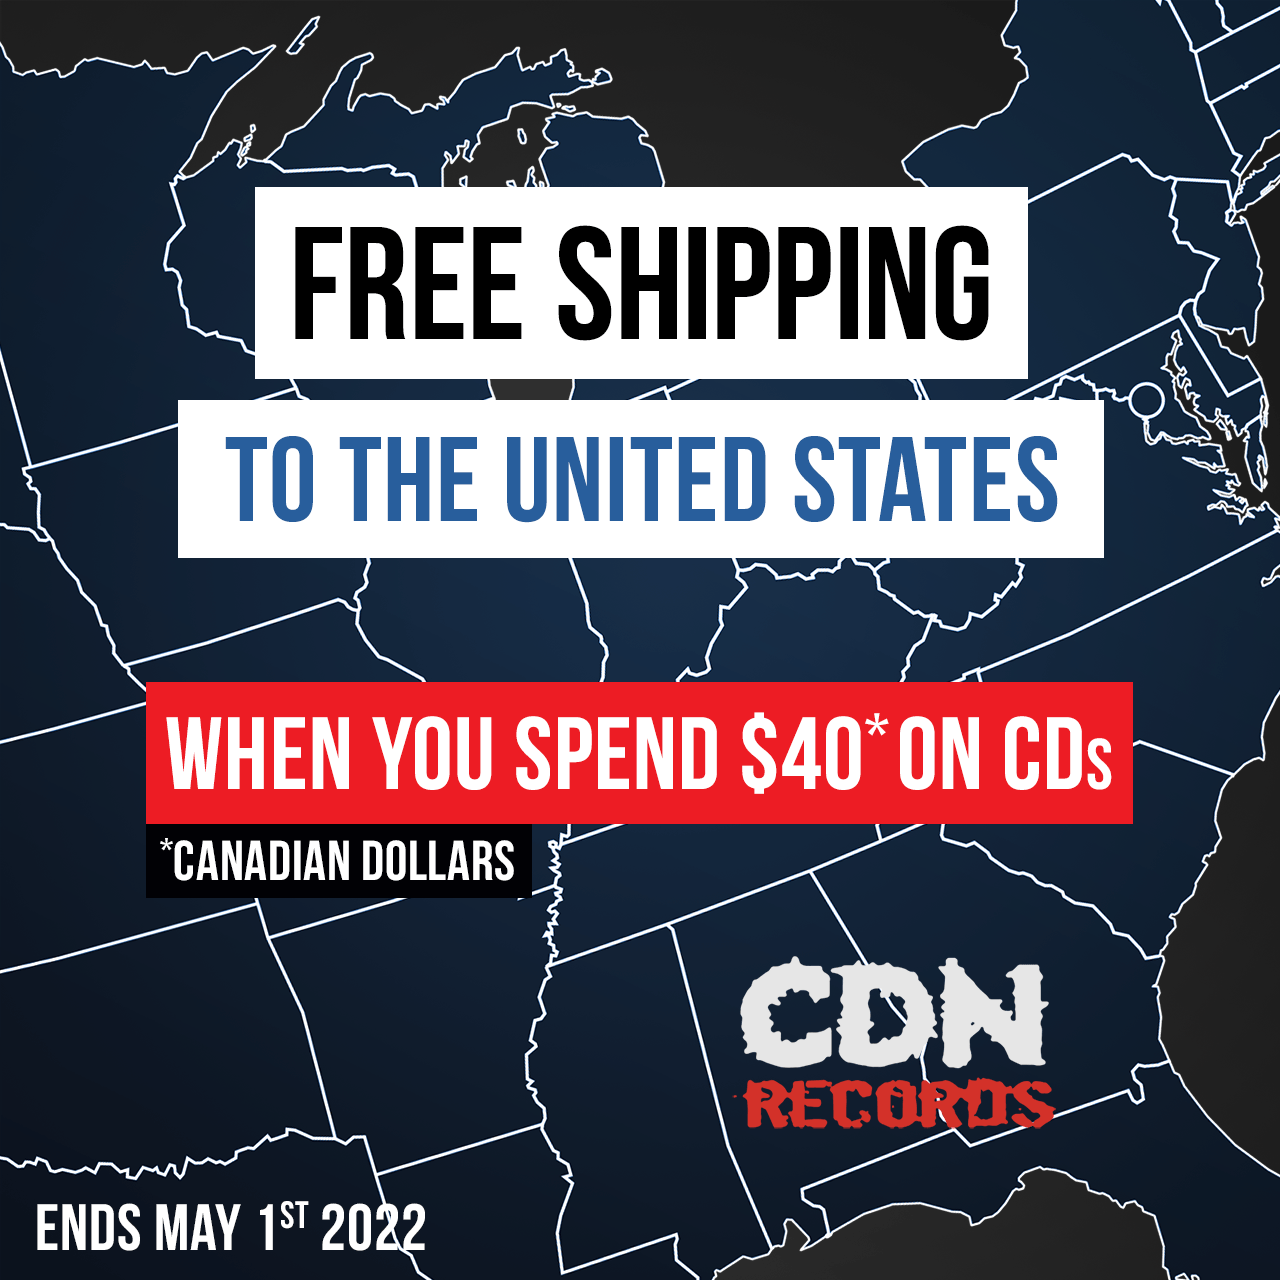 Graphic for free shipping to the USA